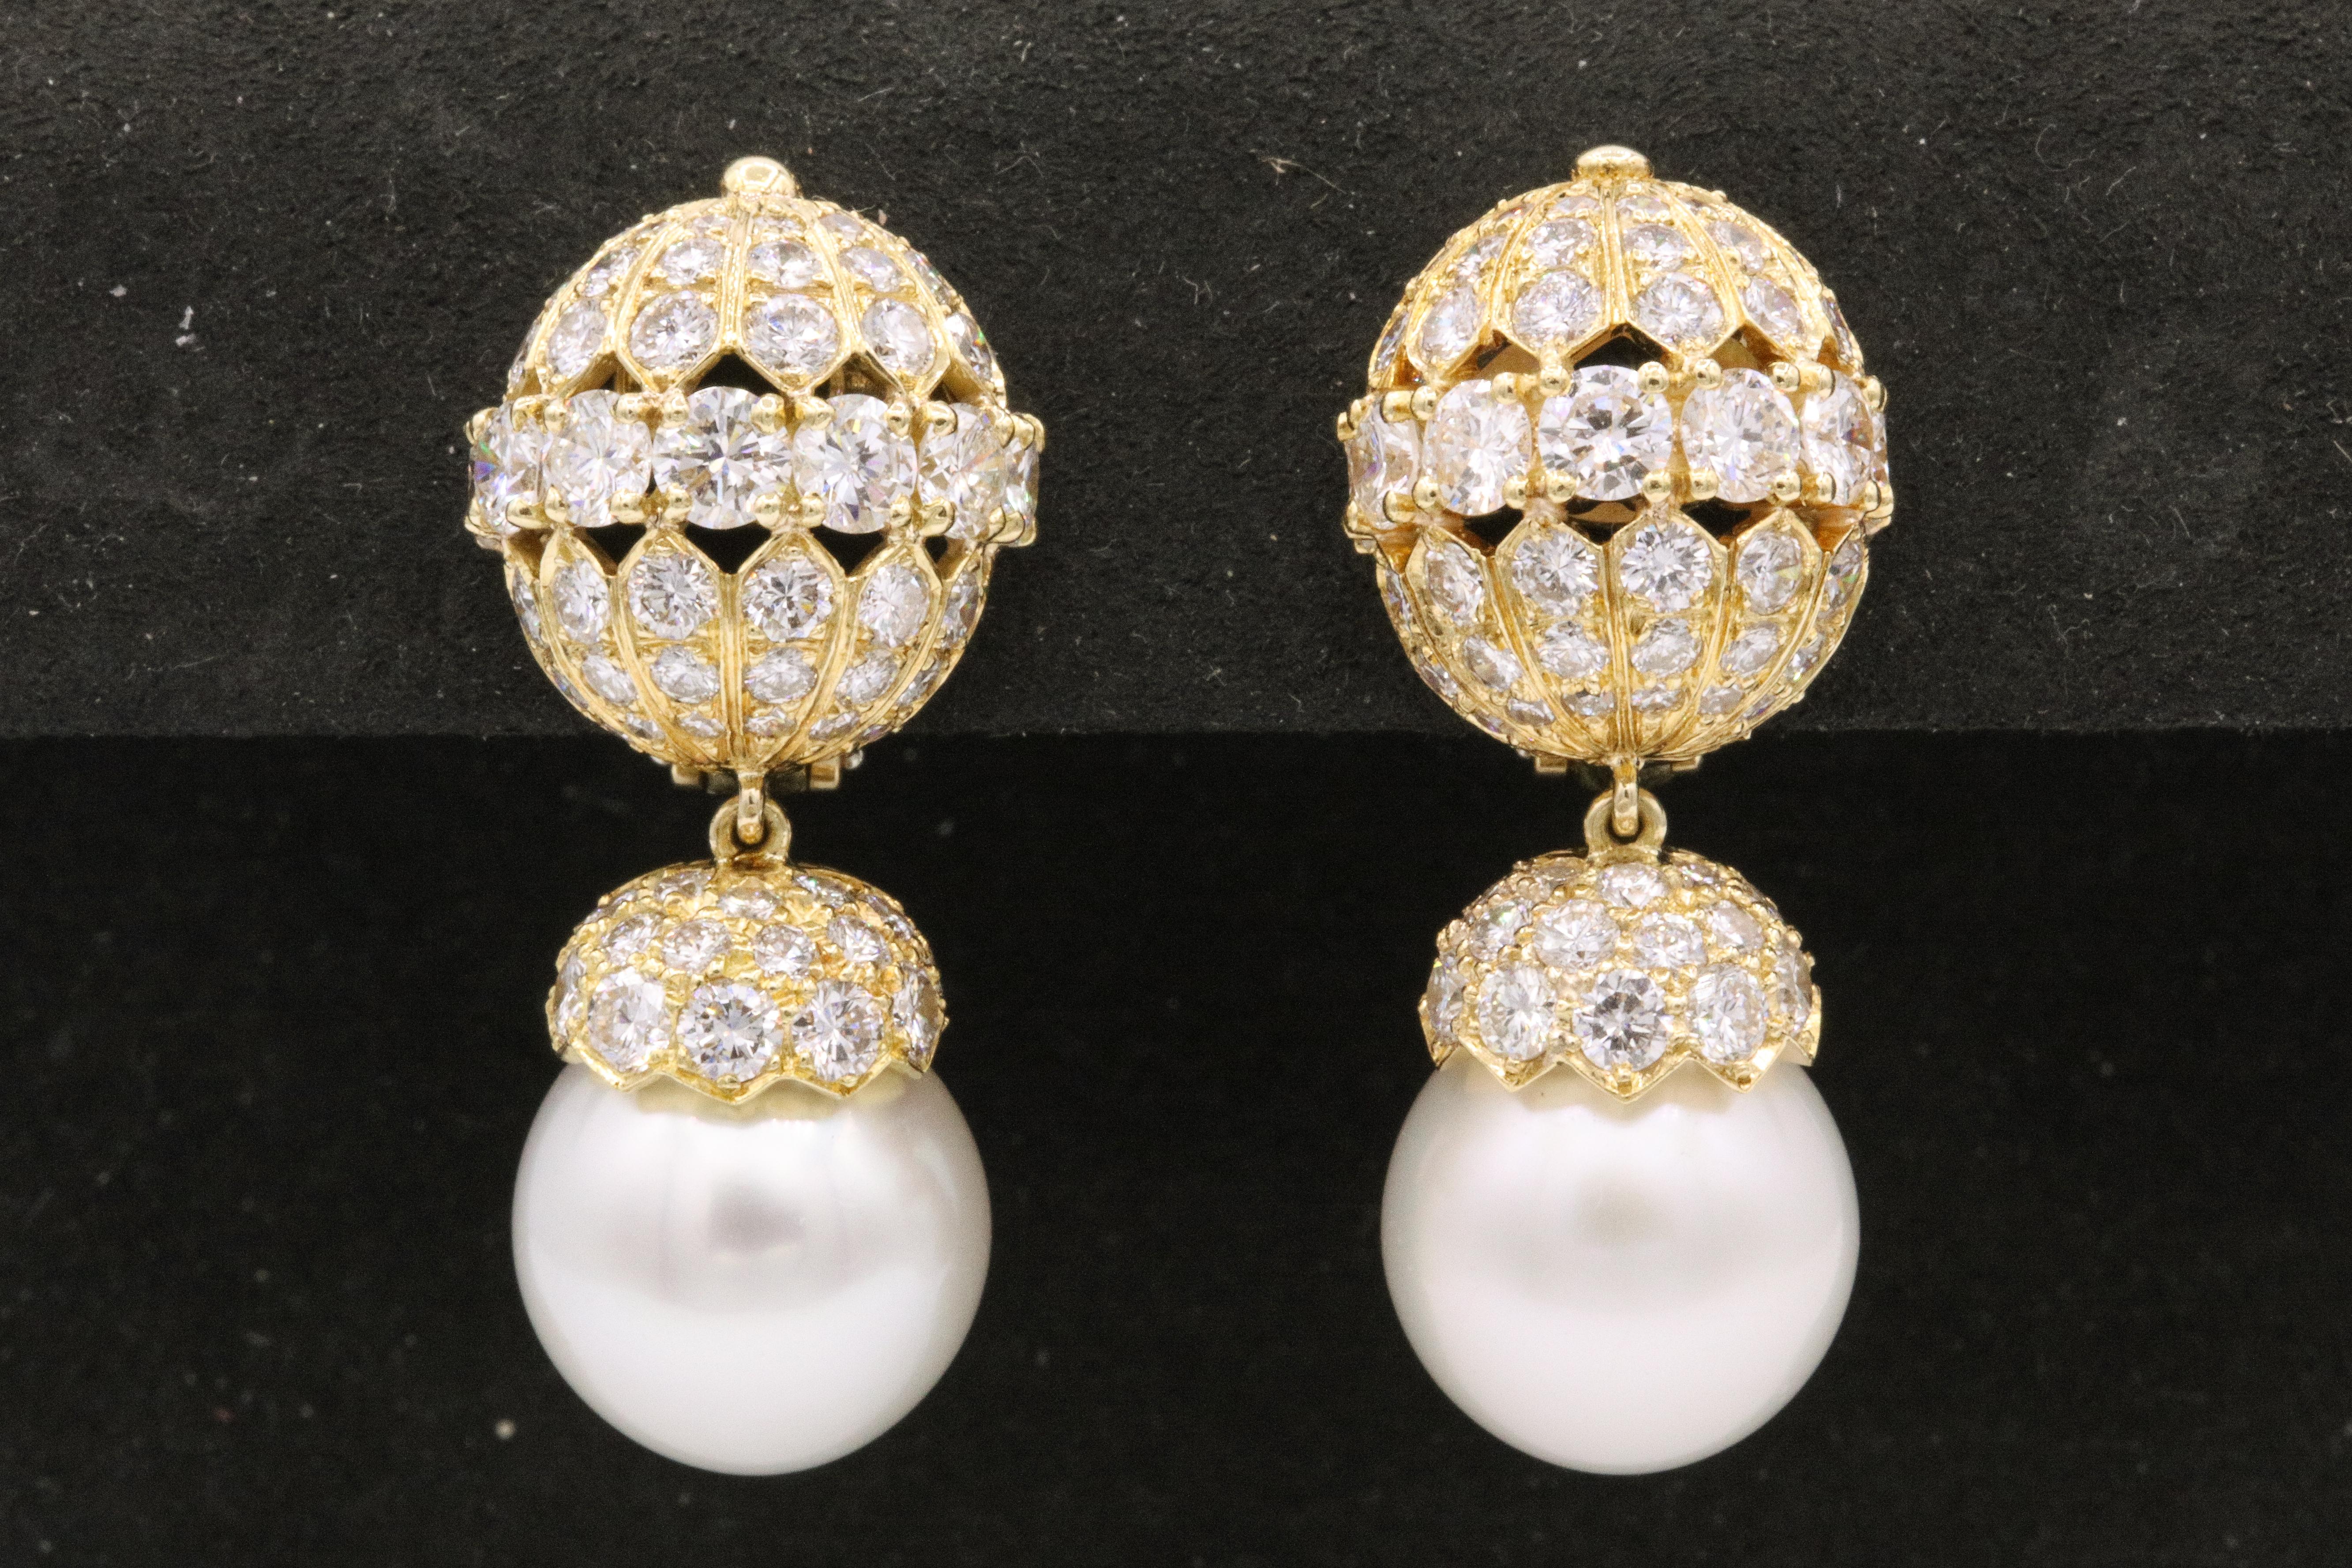 Van Cleef & Arpels cultured pearl and diamond earclips. The two cultured pearls measure approximately 12.5 mm, capped by round brilliants.
Signed: Van Cleef & Arpels, numbered 2402 S.O.; Circa 1965

Comes with Paperwork and pouch. 
Property of